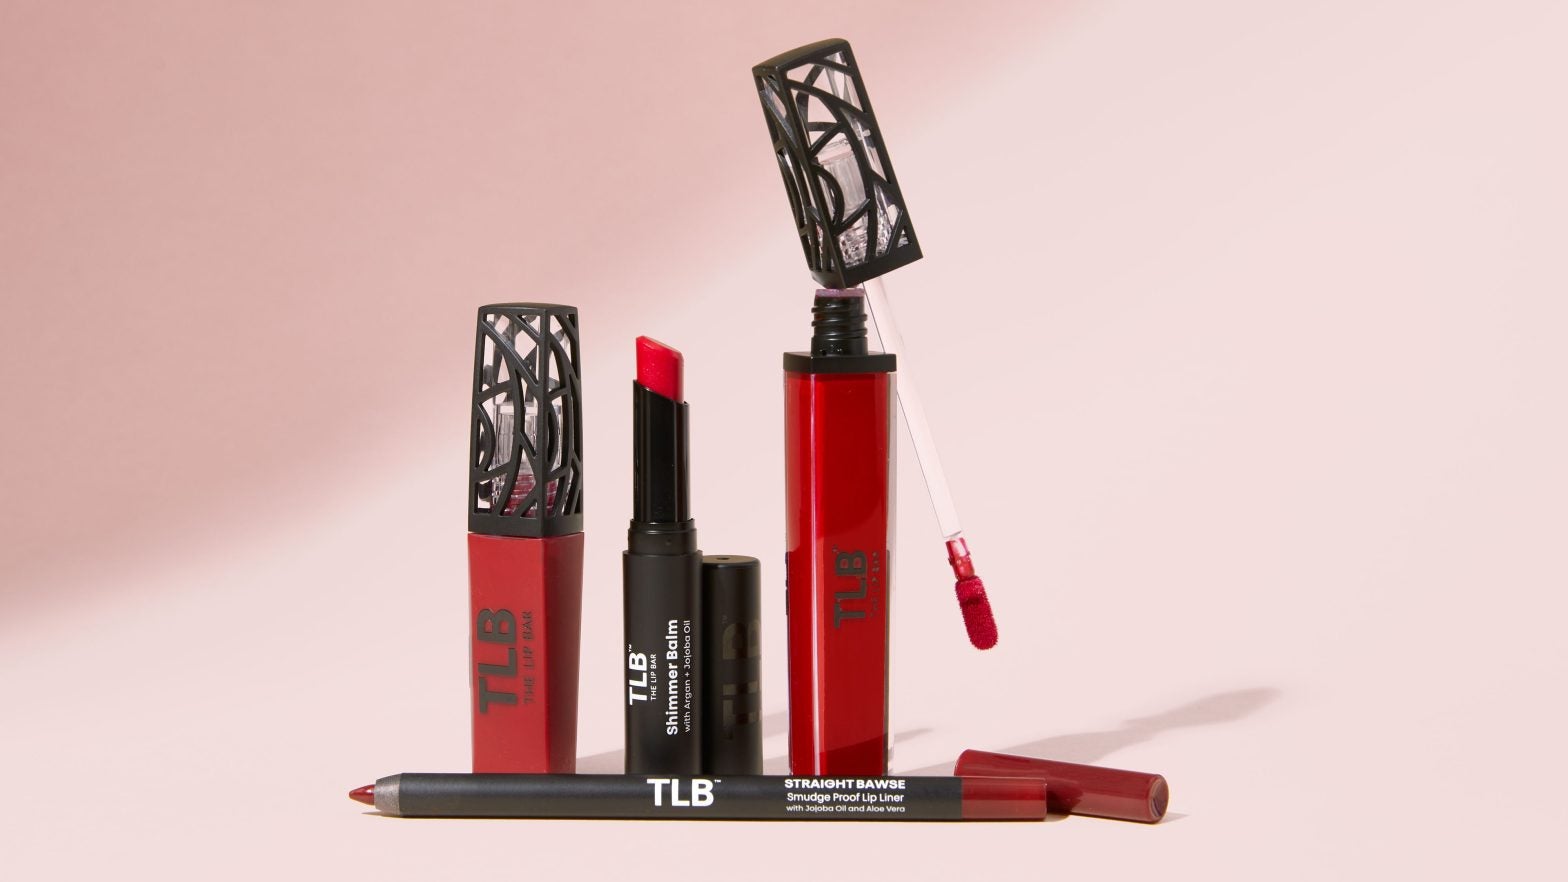 TLB (The Lip Bar) Founder Shares A Message For Future Black Beauty Founders Like Herself